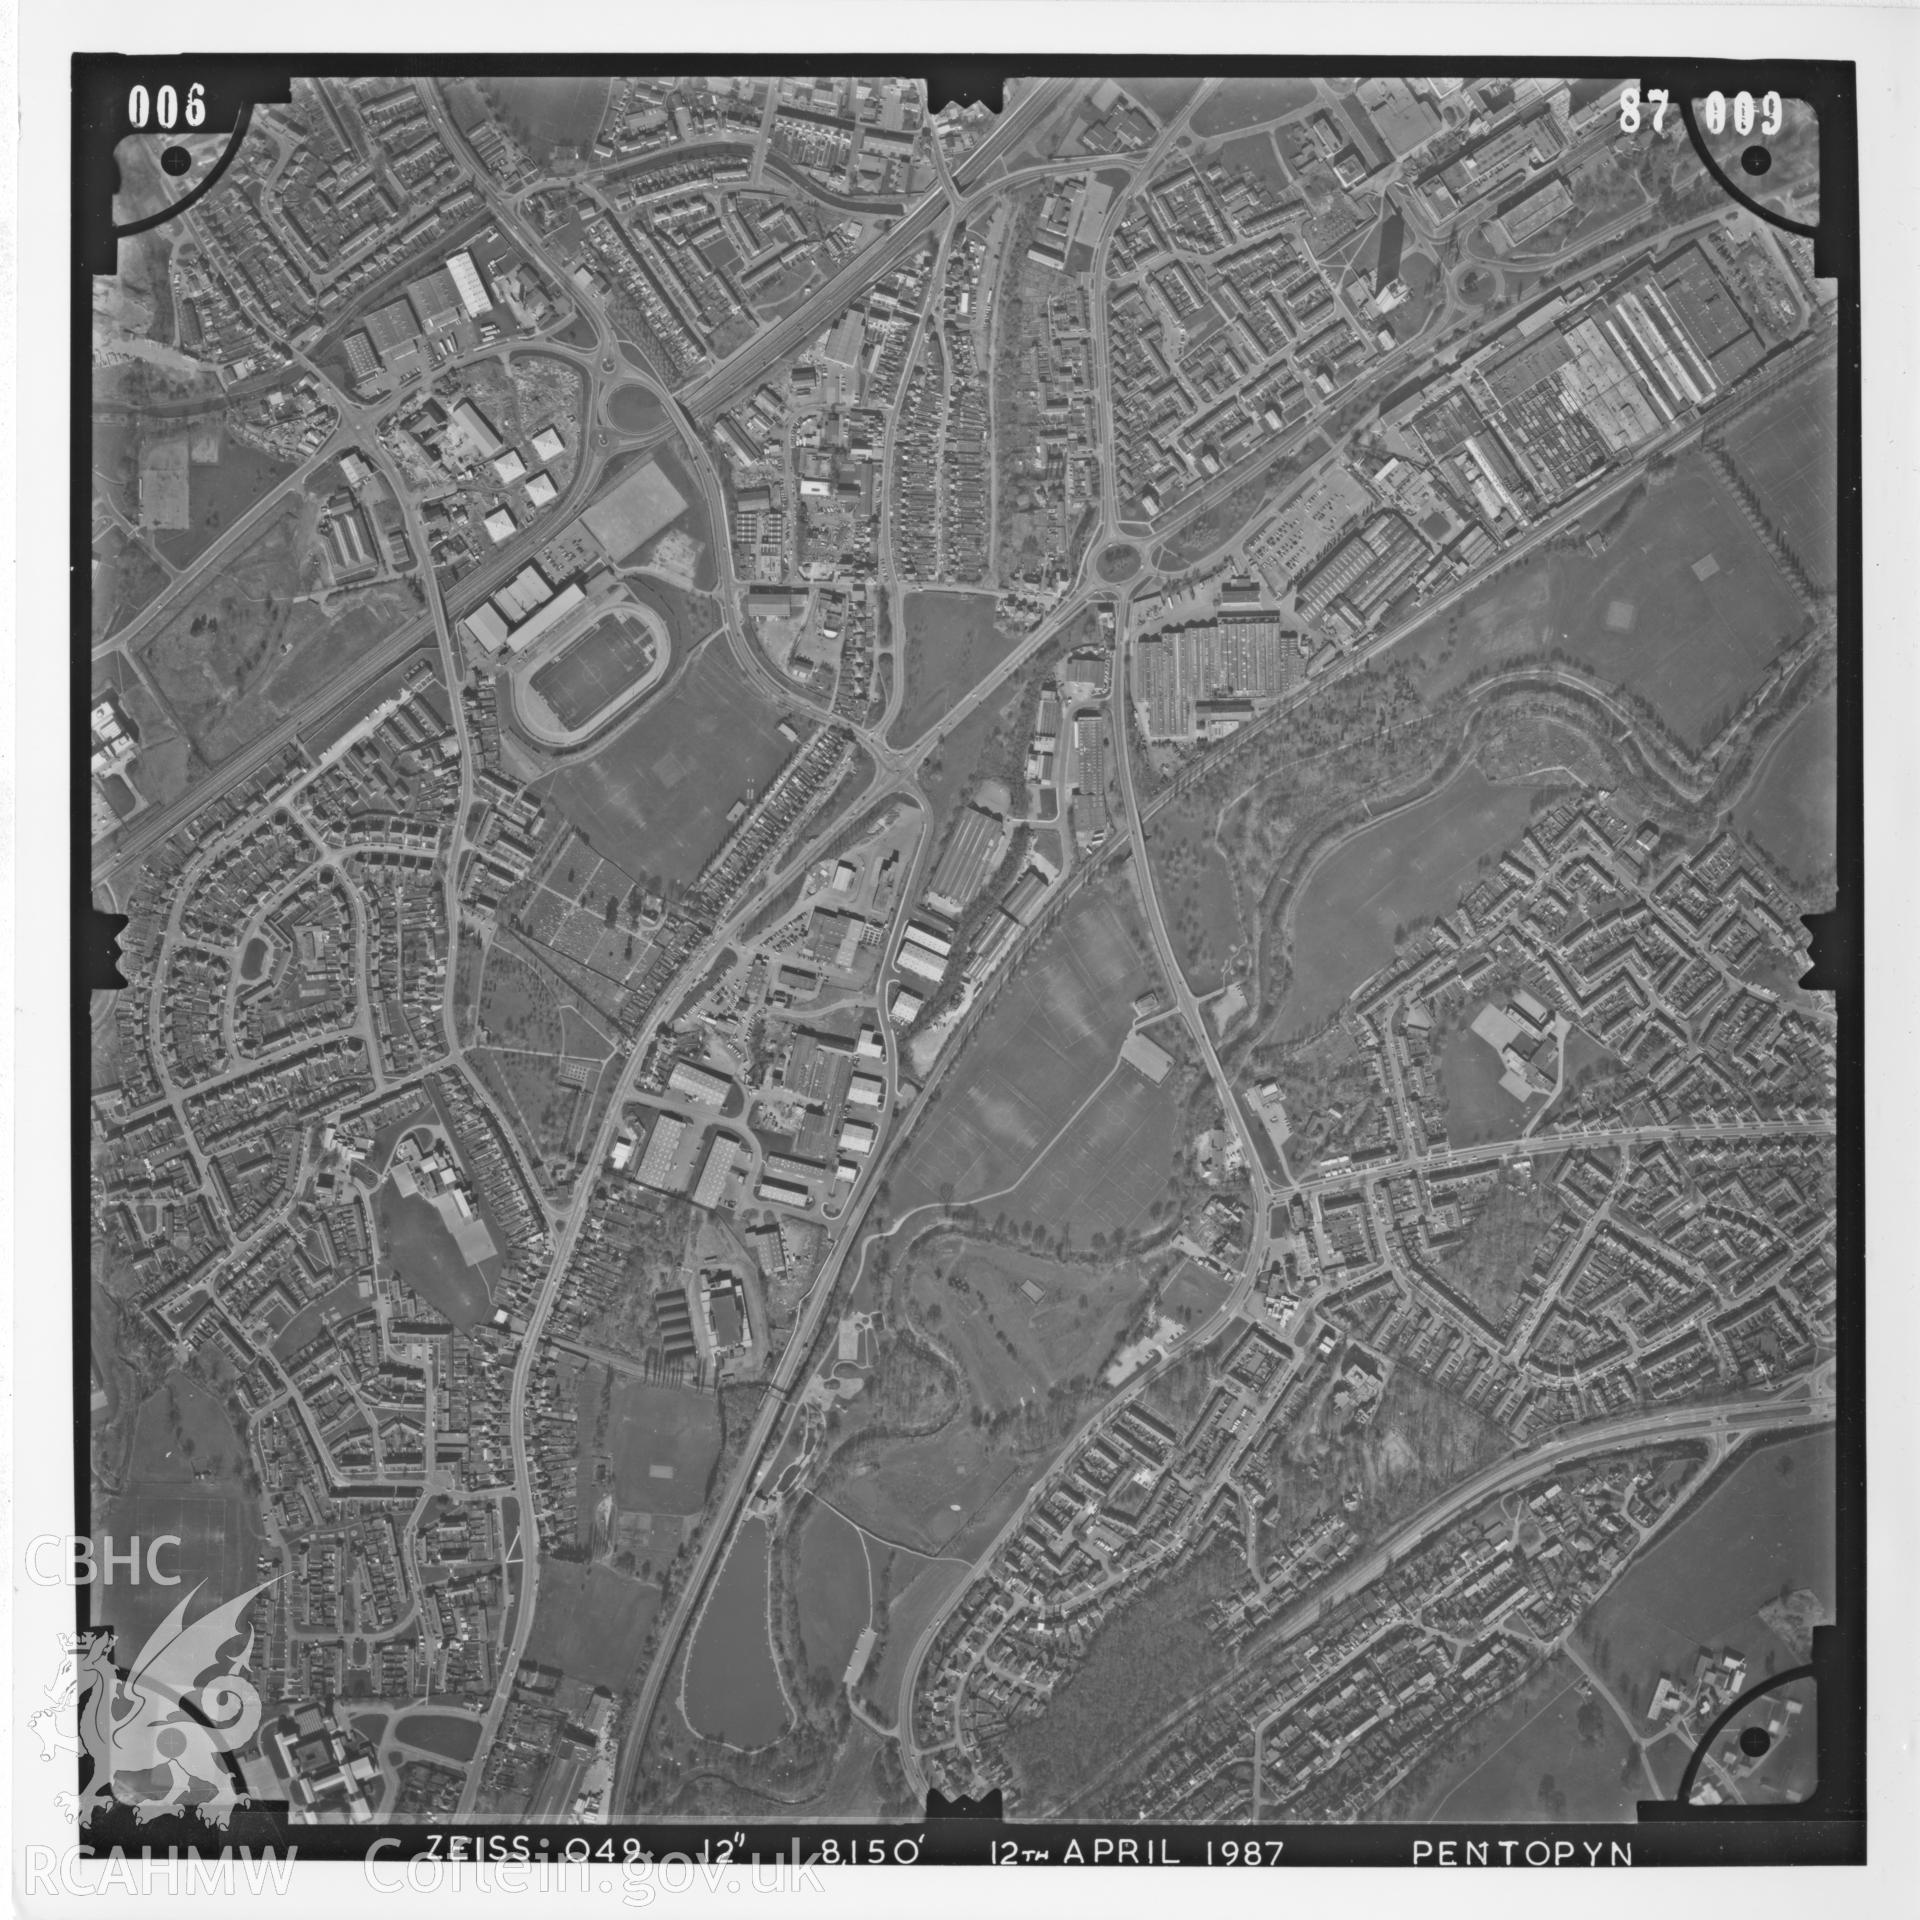 Aerial photograph of Cwmbran, taken on 12th April 1987. Included as part of Archaeology Wales' desk based assessment of former Llantarnam Community Primary School, Croeswen, Oakfield, Cwmbran, conducted in 2017.